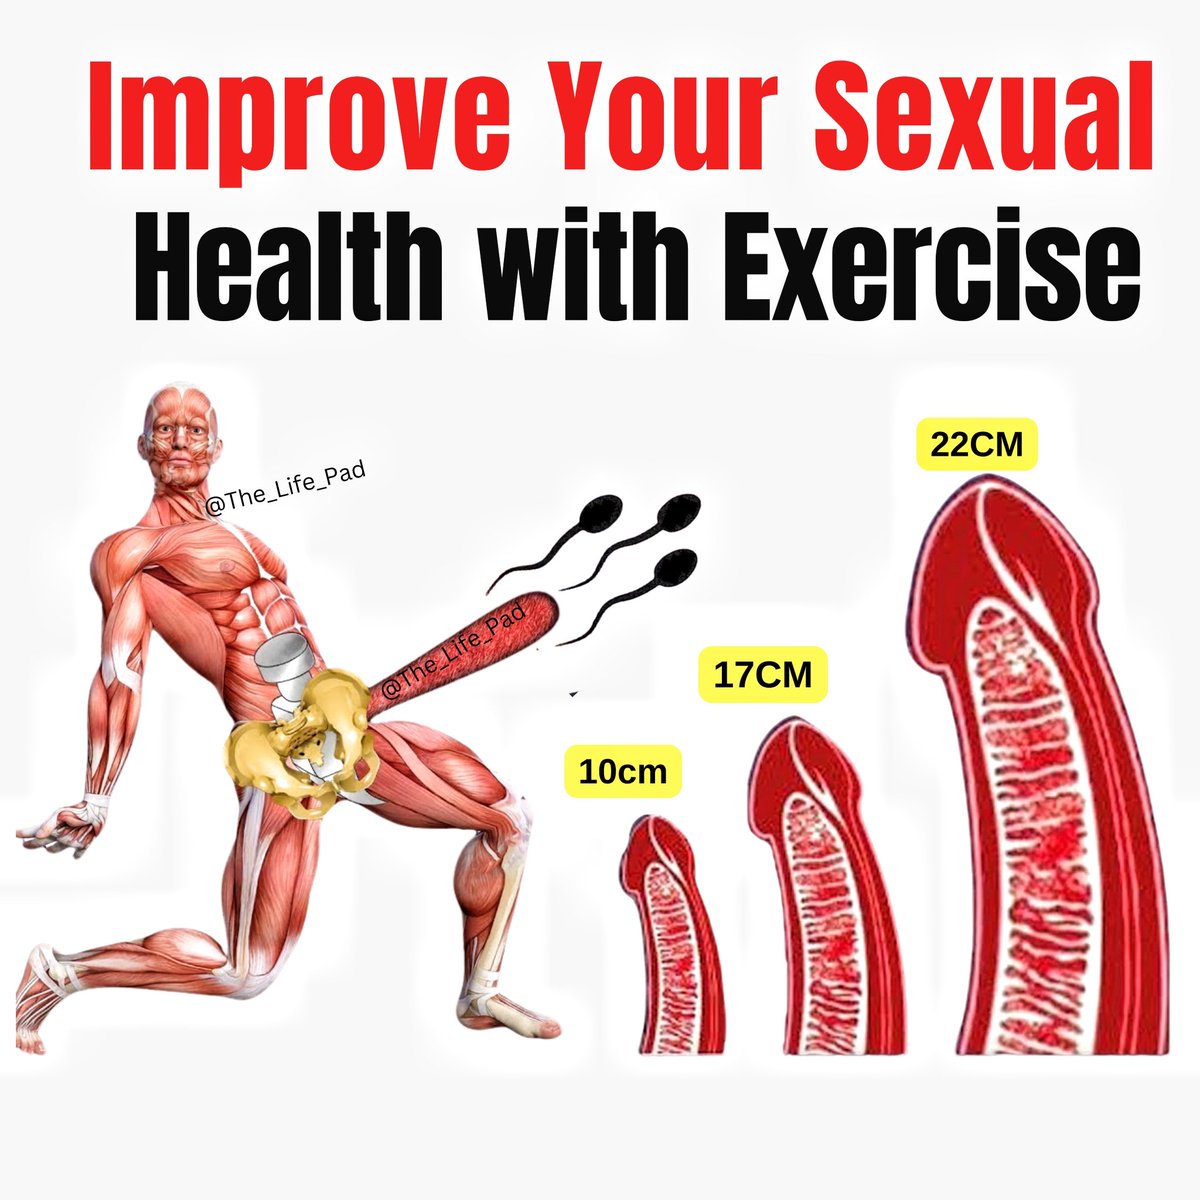 Improve Your Sexual Health with Kegel Exercises 🍆

(for educational purpose)